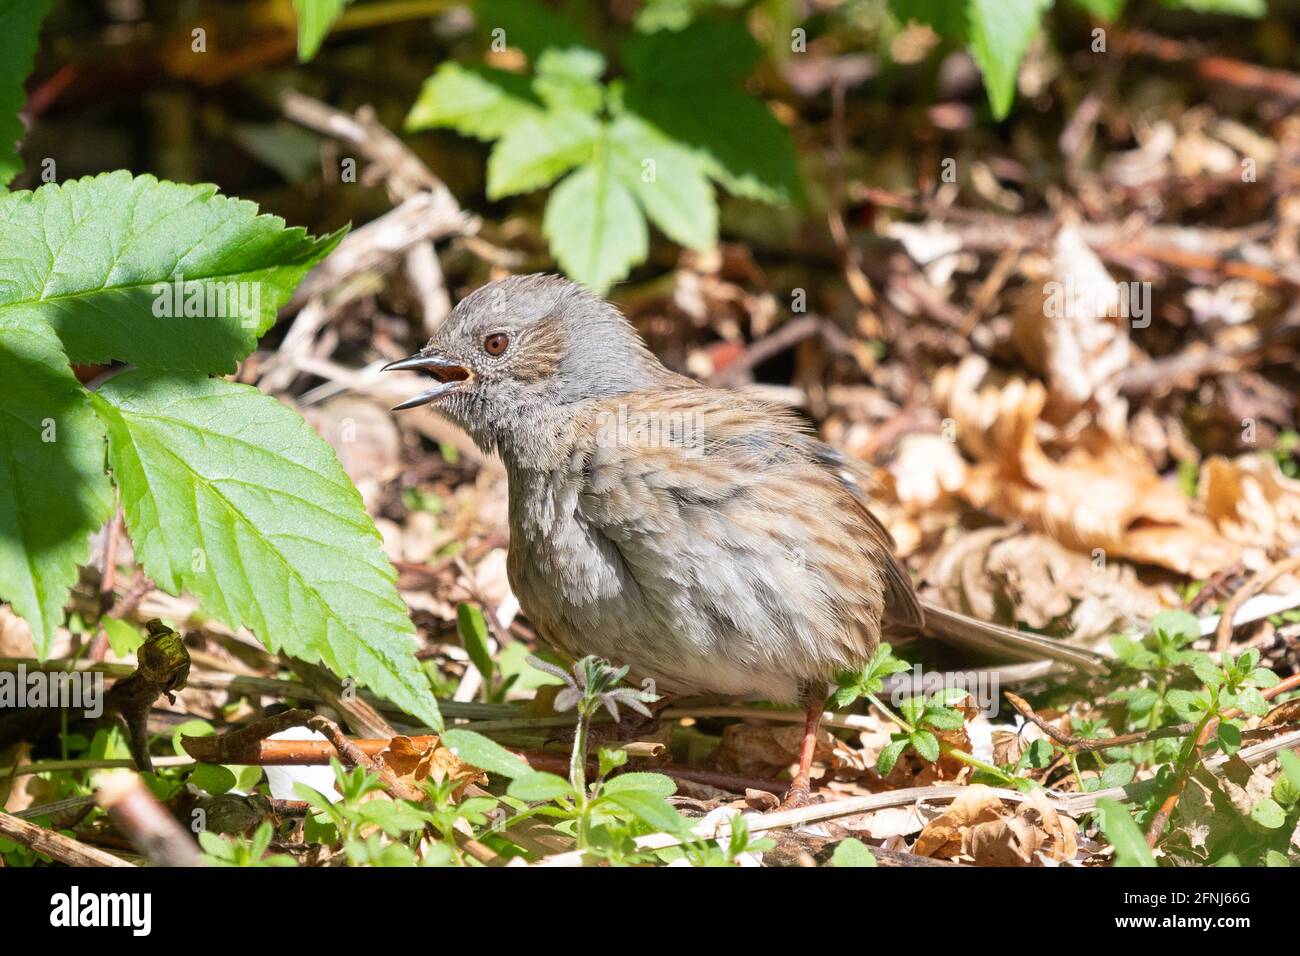 Dunnock (Prunella modularis) sunbathing and preening to spread preen oil over the feathers and help get rid of any lice or parasites - UK Stock Photo